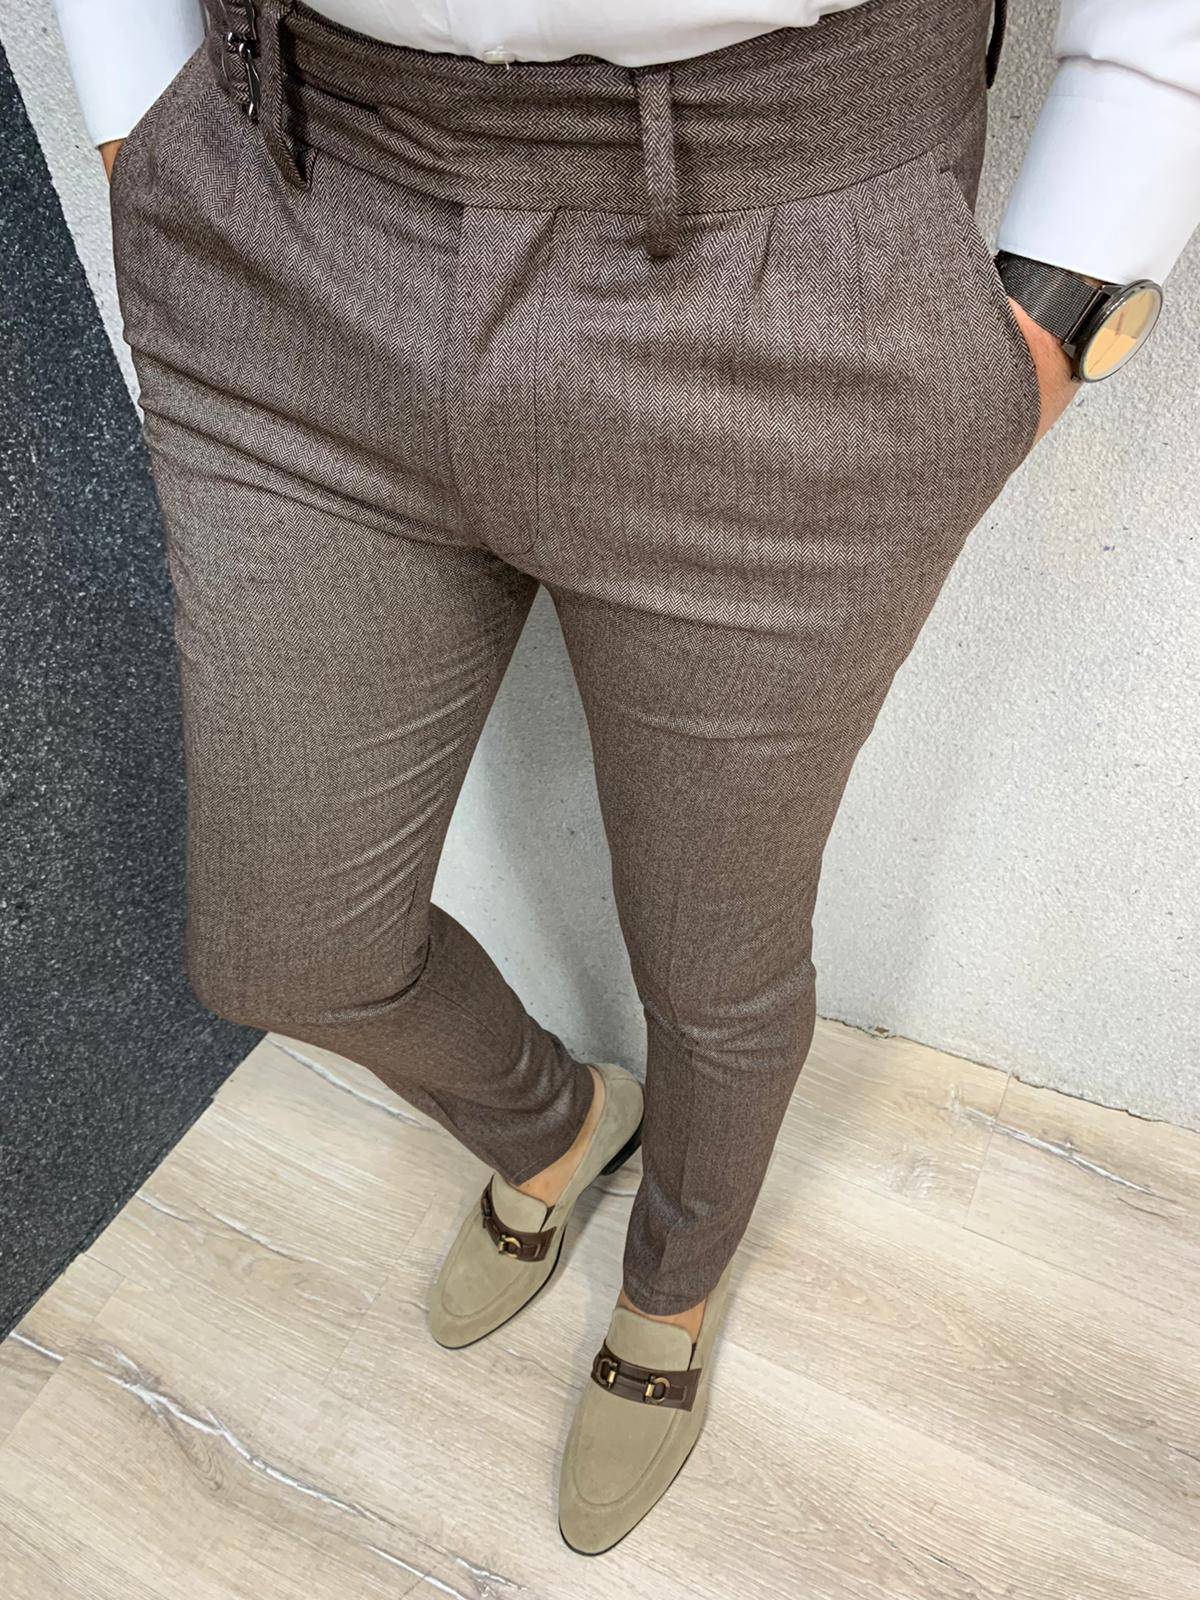 New Brown Canvas Pants